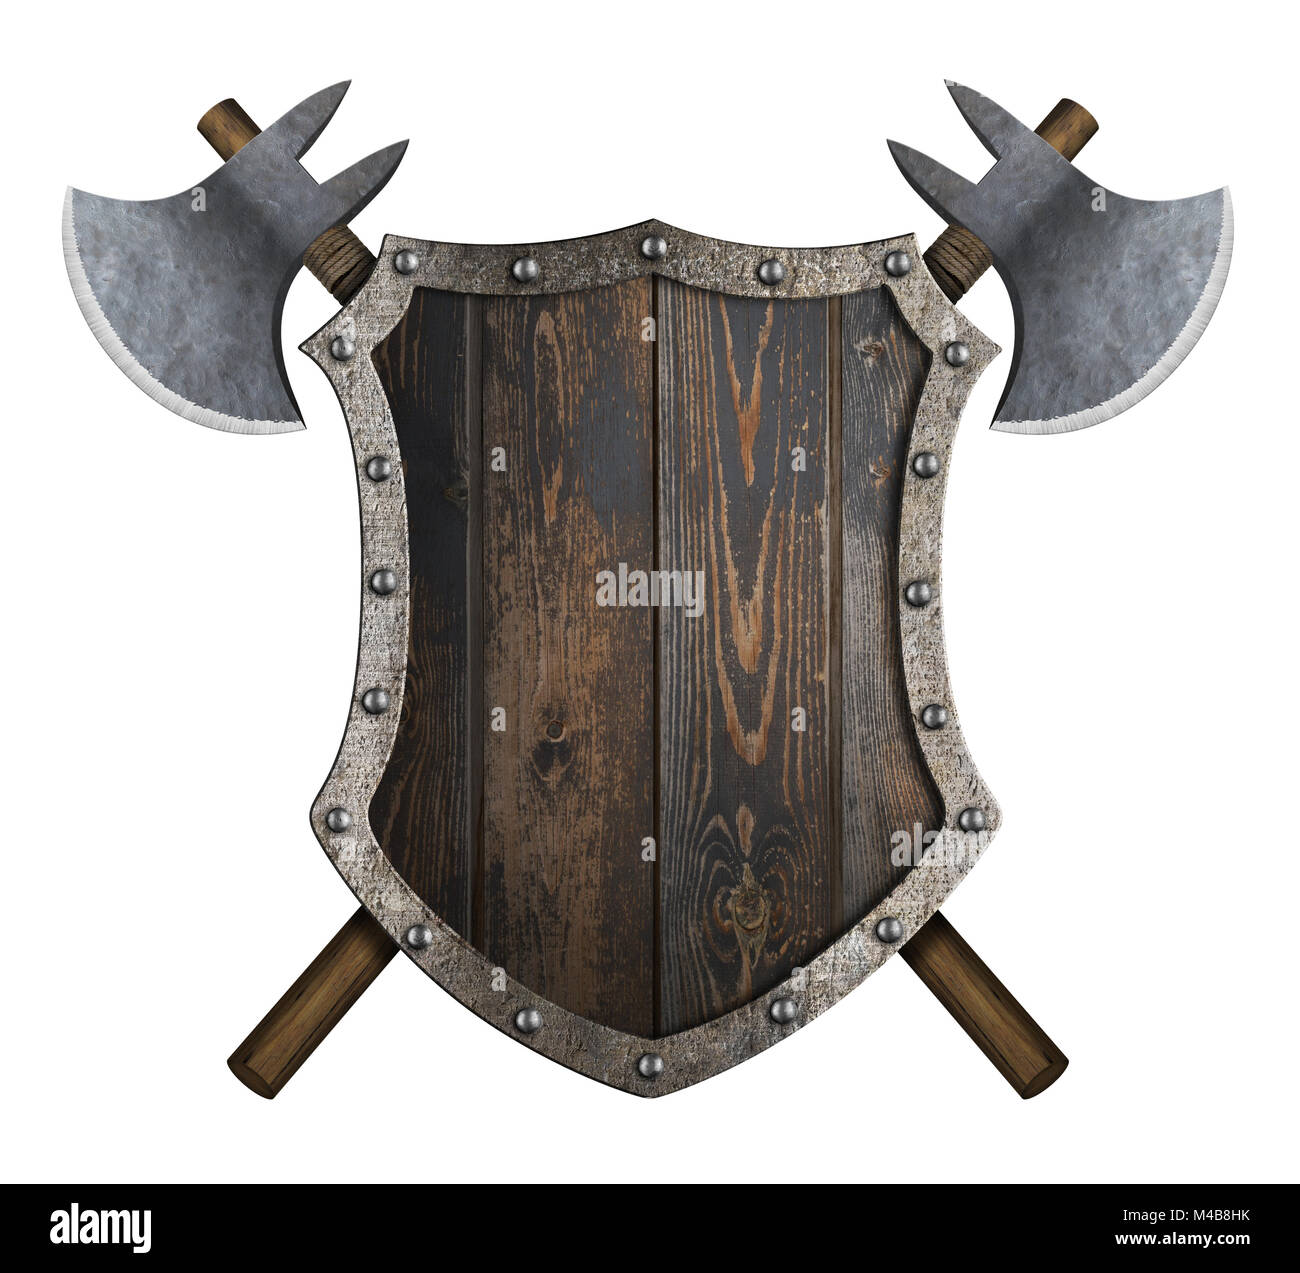 Wooden medieval shield with crossed axes 3d illustration Stock Photo